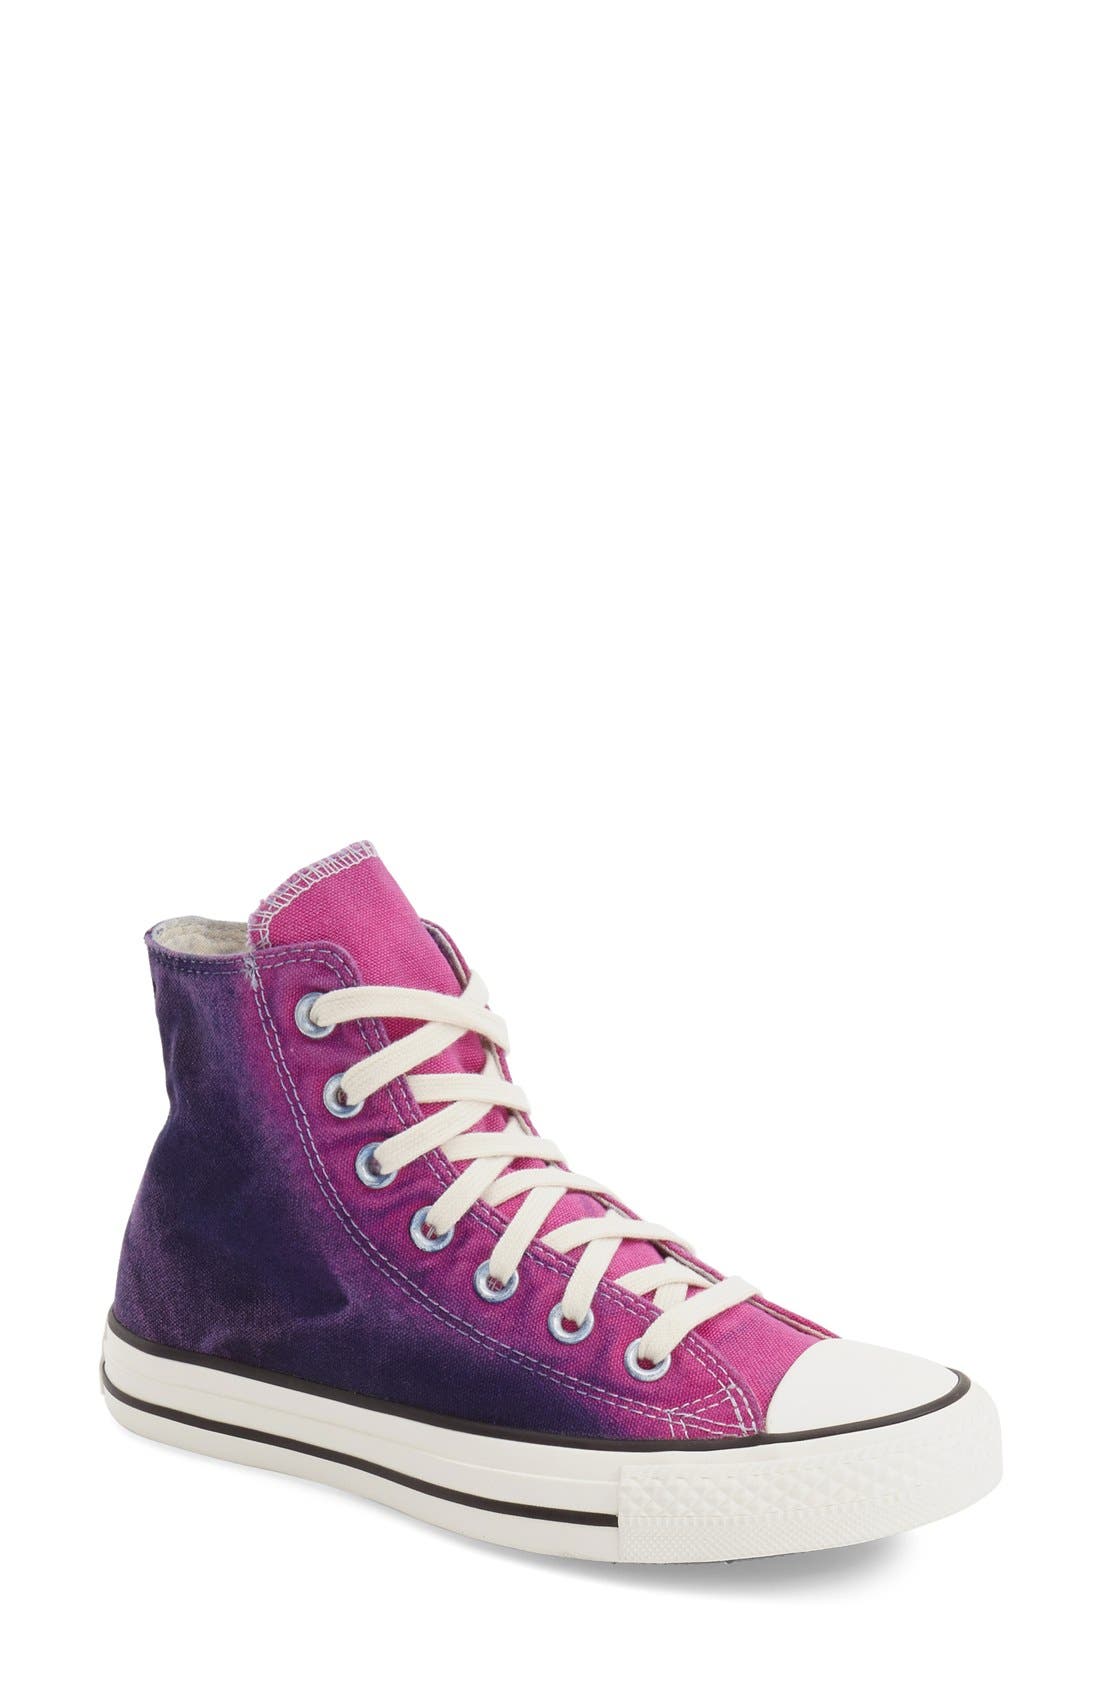 converse ombre pink